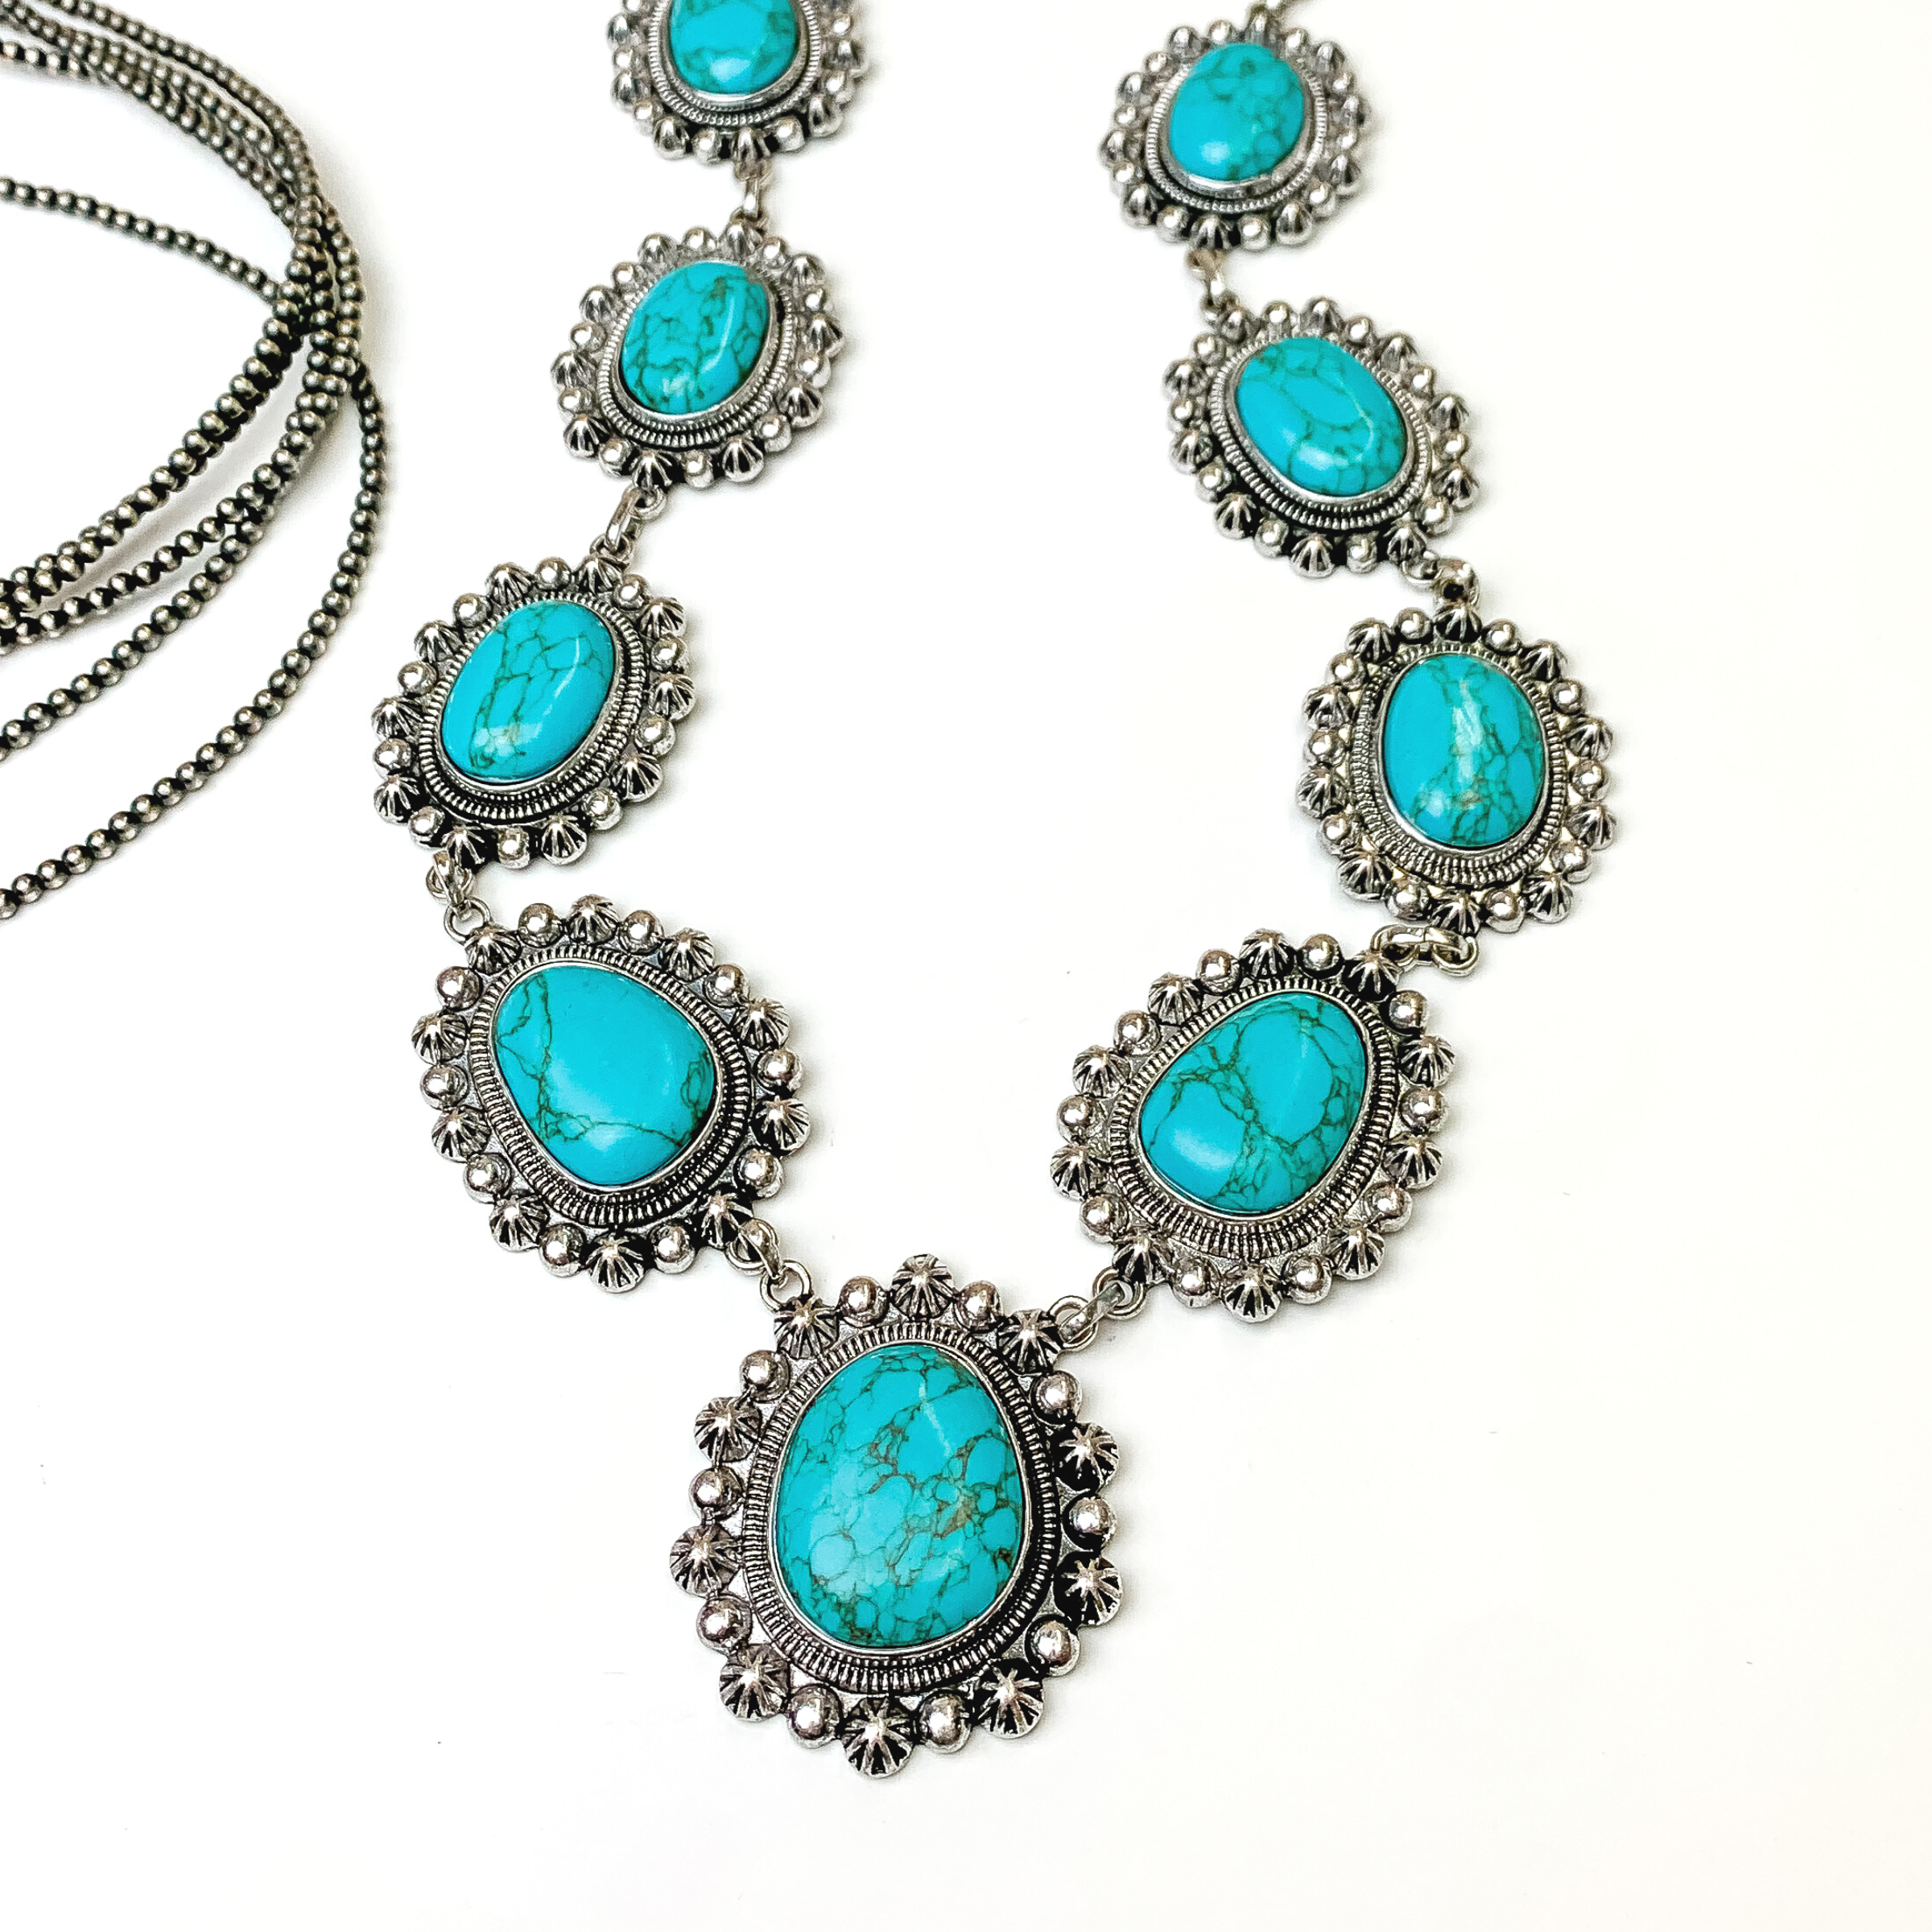 Silver necklace with circular turquoise stones. Each stone has a silver beaded outline. This necklace is pictured on a white background with silver beads on the left side of the picture.